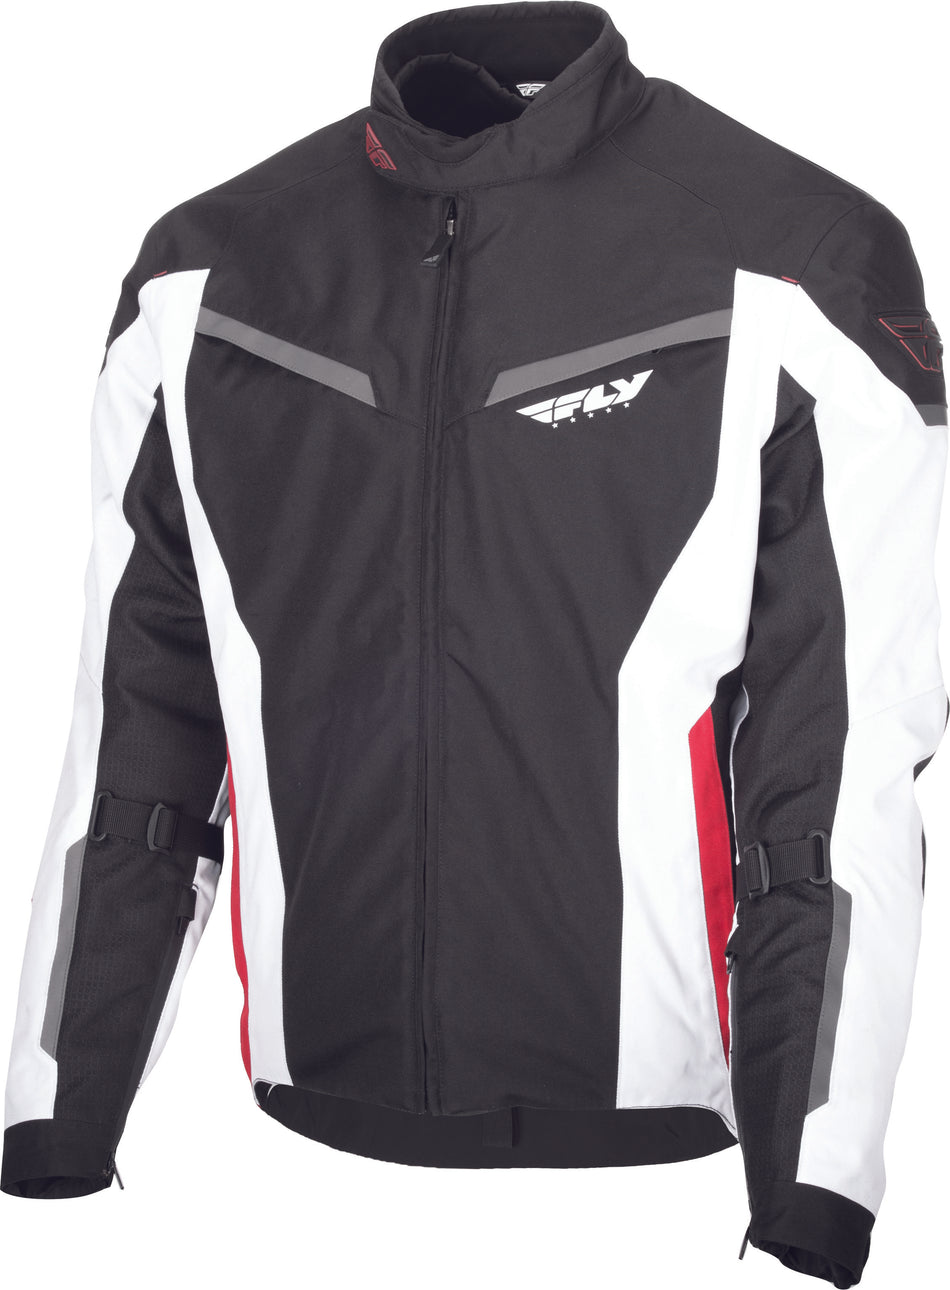 FLY RACING Strata Jacket Black/White/Red Md 477-2101-3